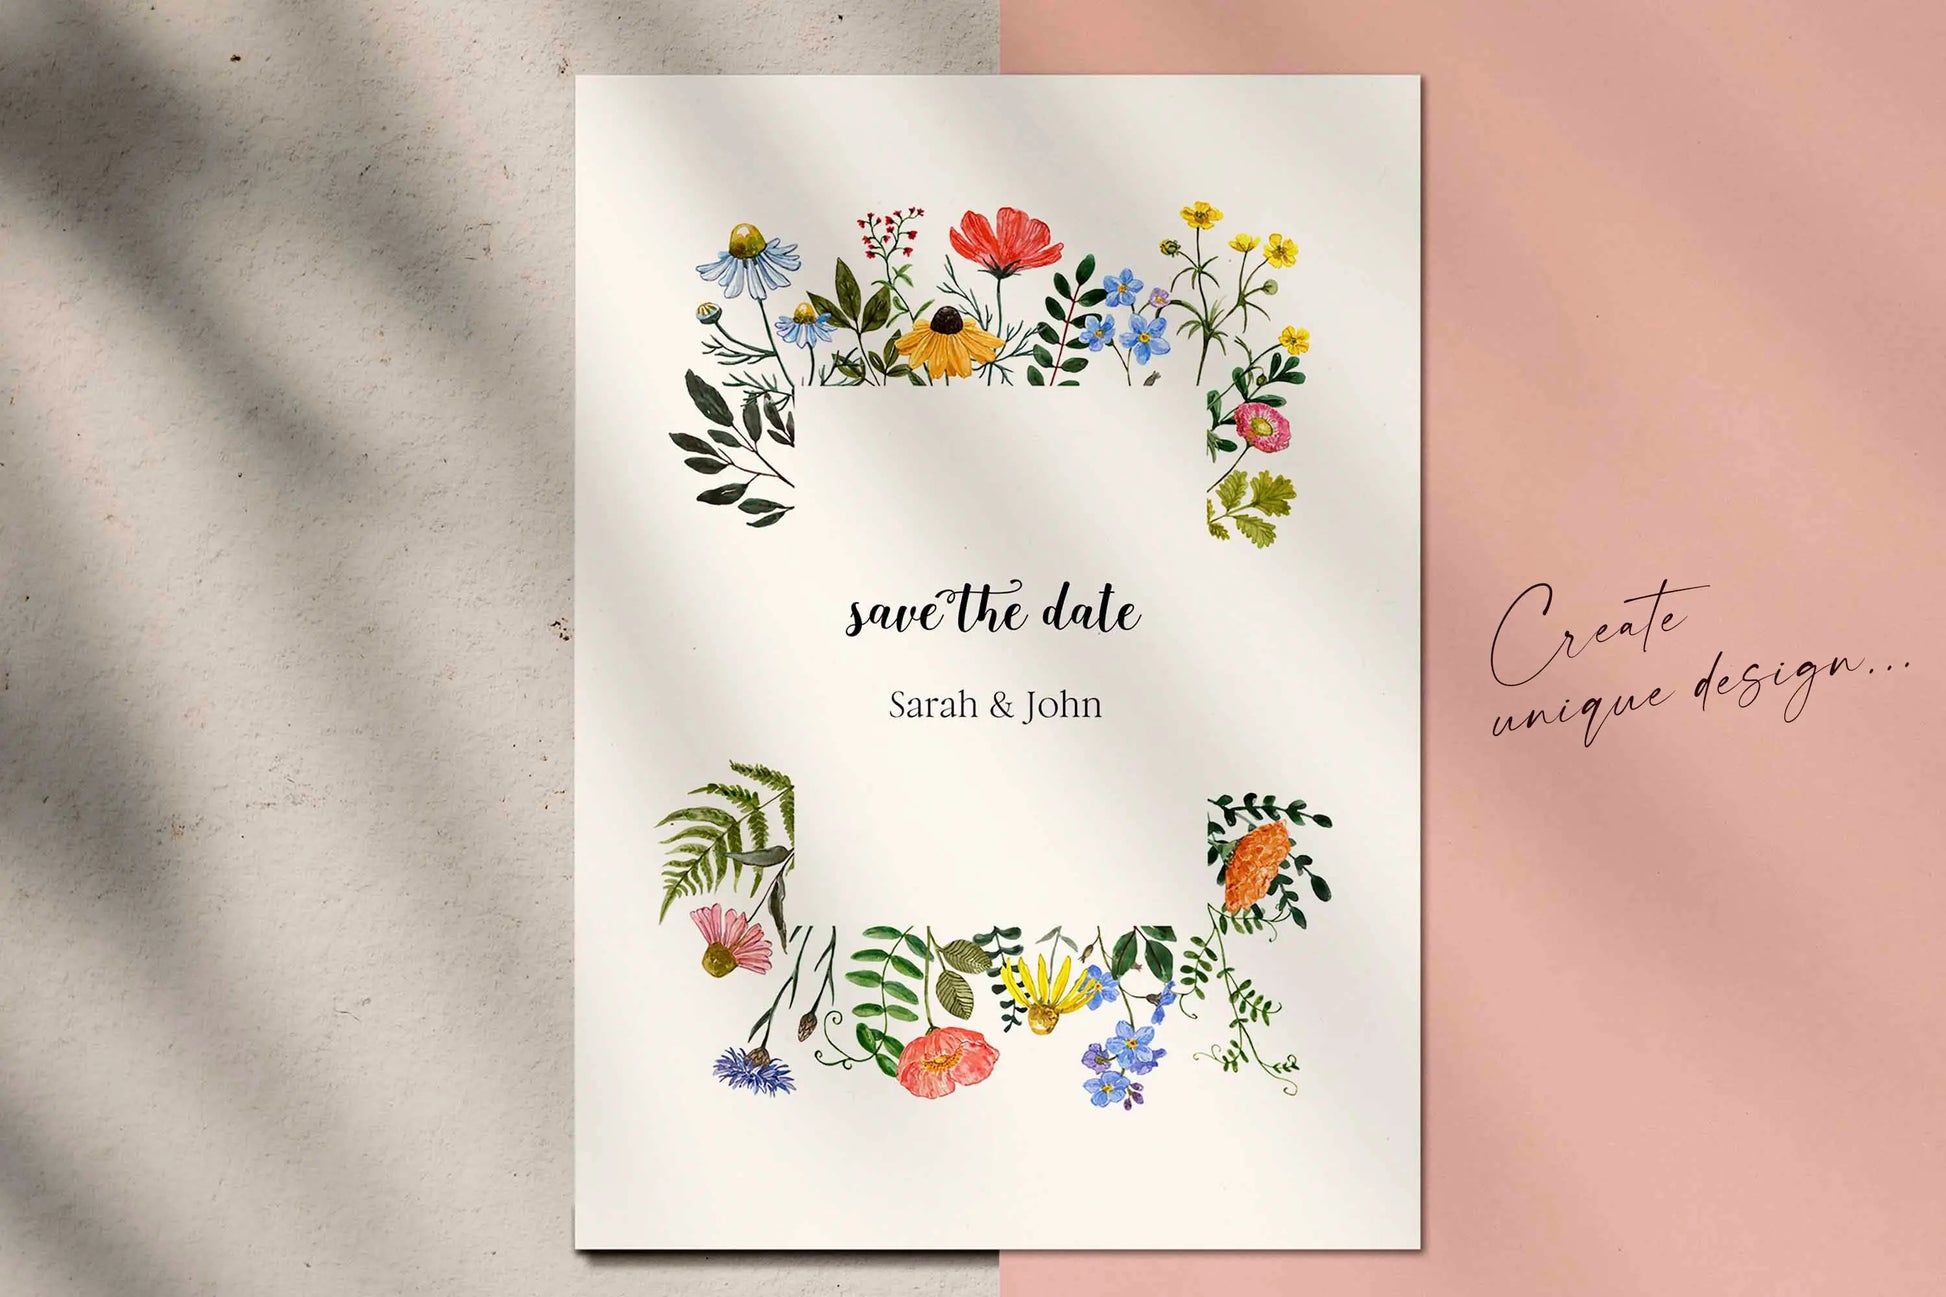 Watercolor Meadow Wildflower Frames and Borders clipart, watercolor wildflower clipart PNG, wildflower wedding invitation